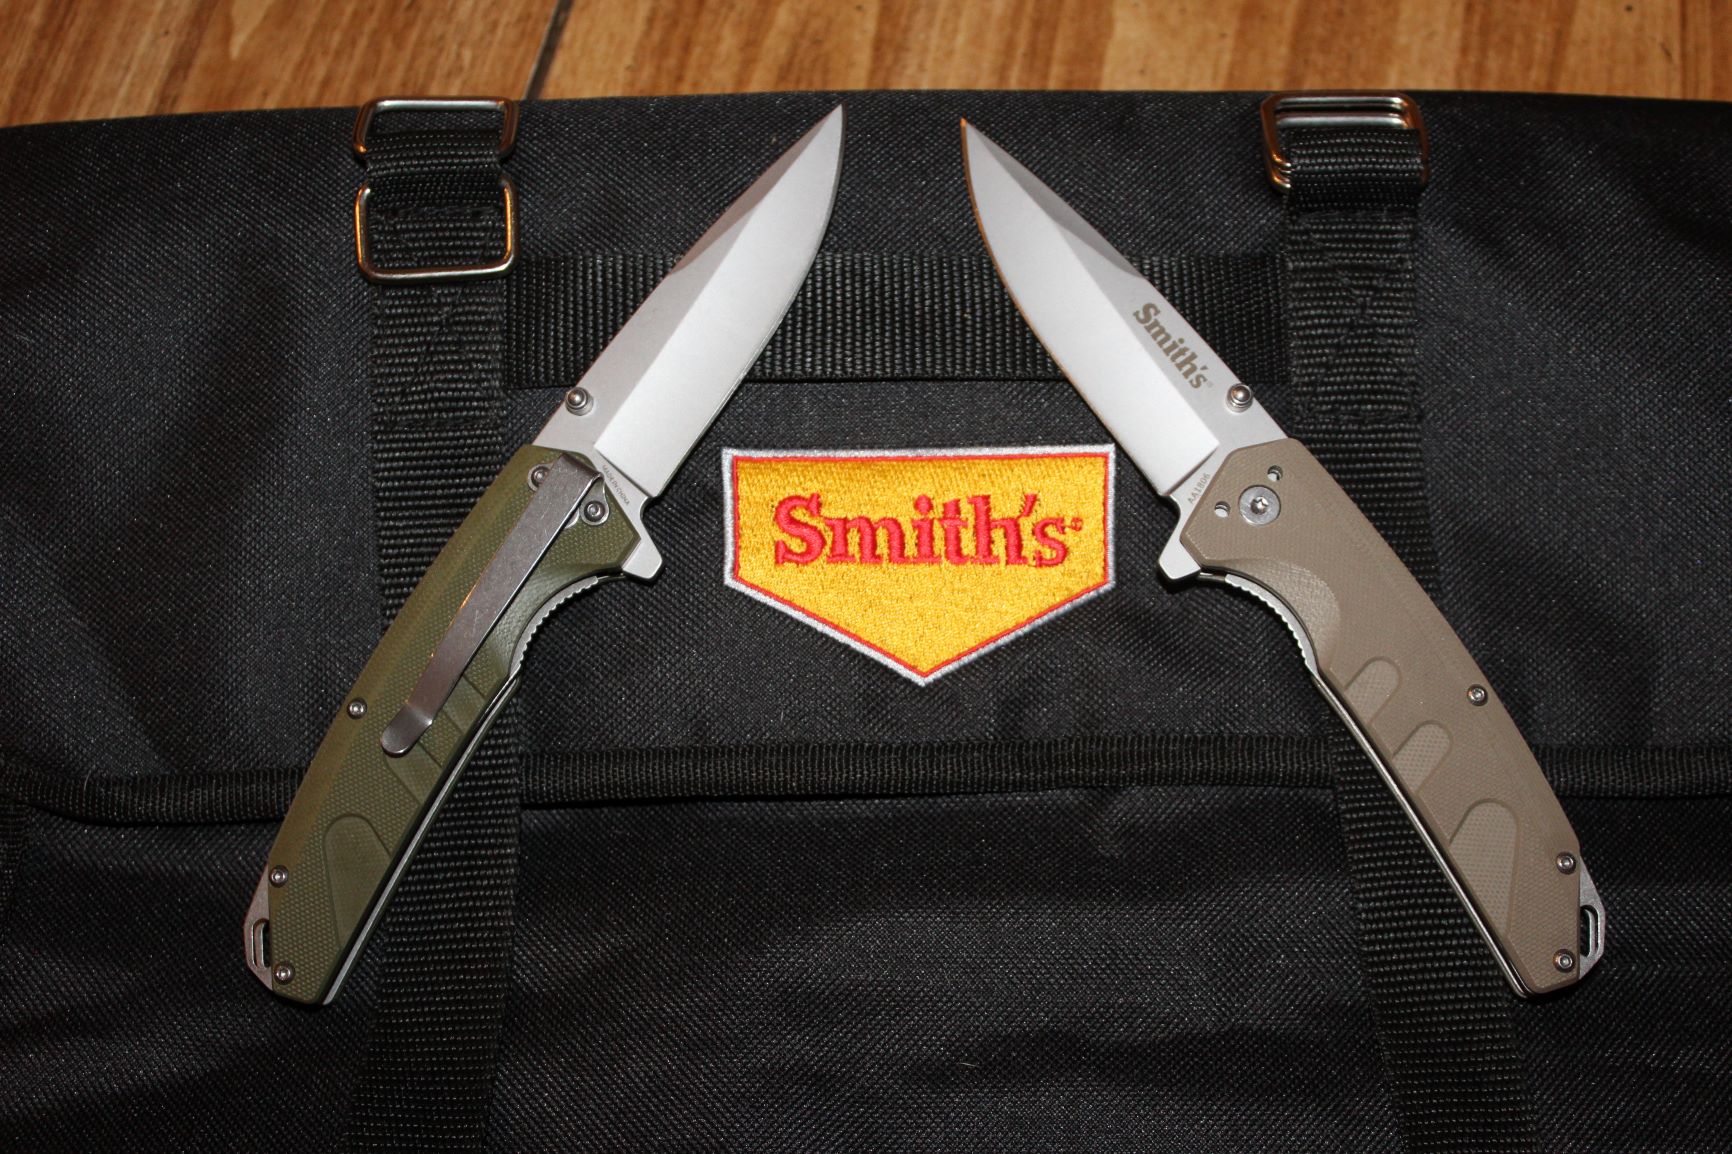 https://www.ammoland.com/wp-content/uploads/2019/04/SMITHS-RALLY-KNIVES.jpg